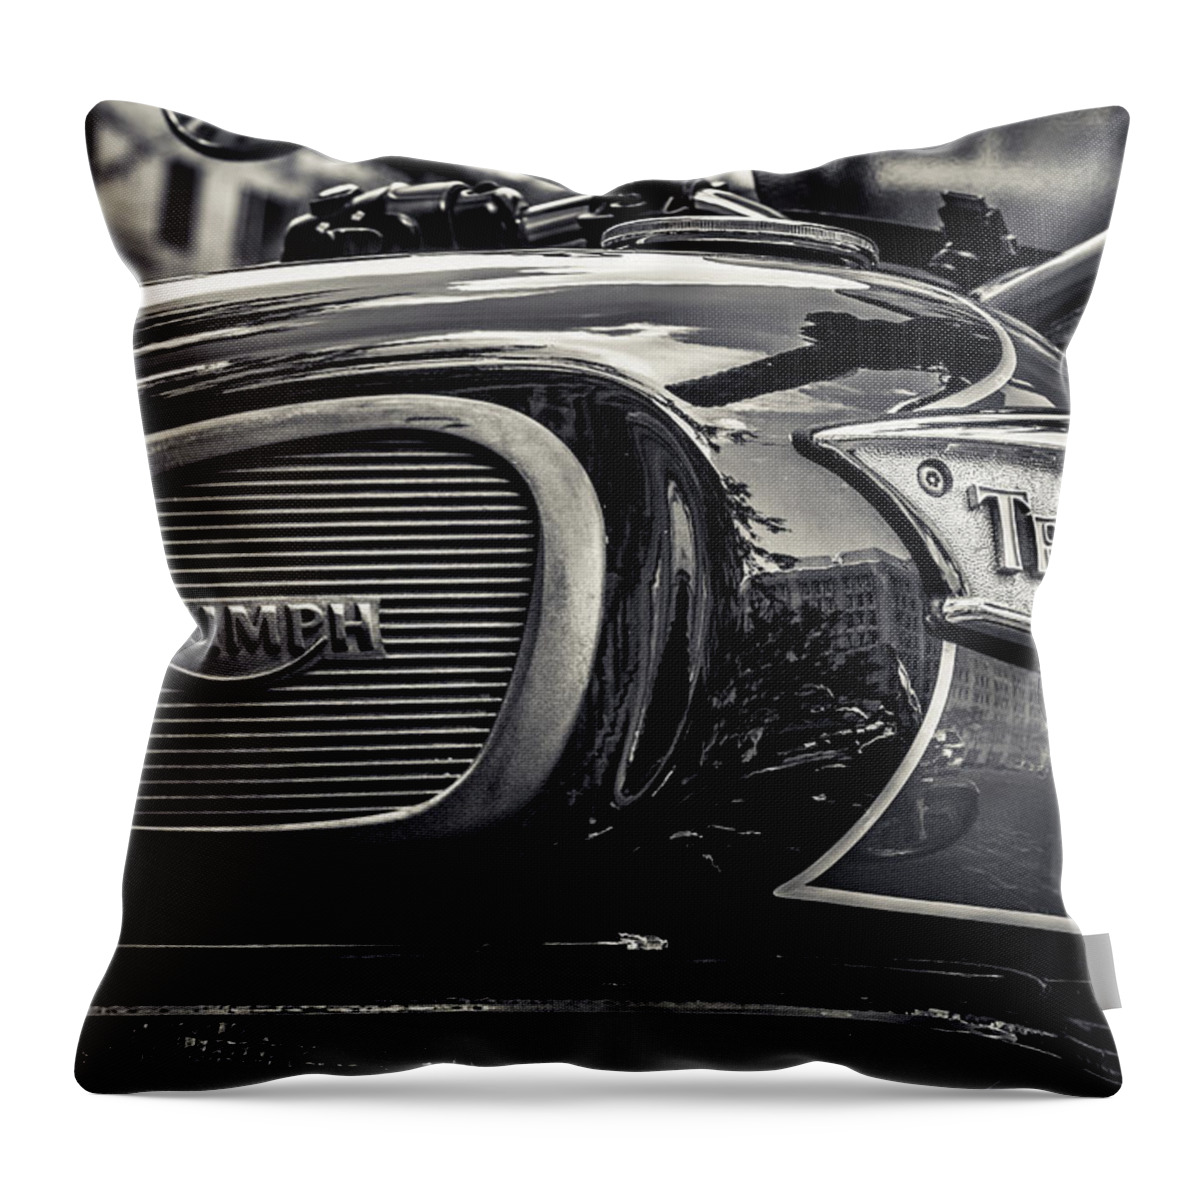 Triumph Throw Pillow featuring the photograph Triumph by Off The Beaten Path Photography - Andrew Alexander